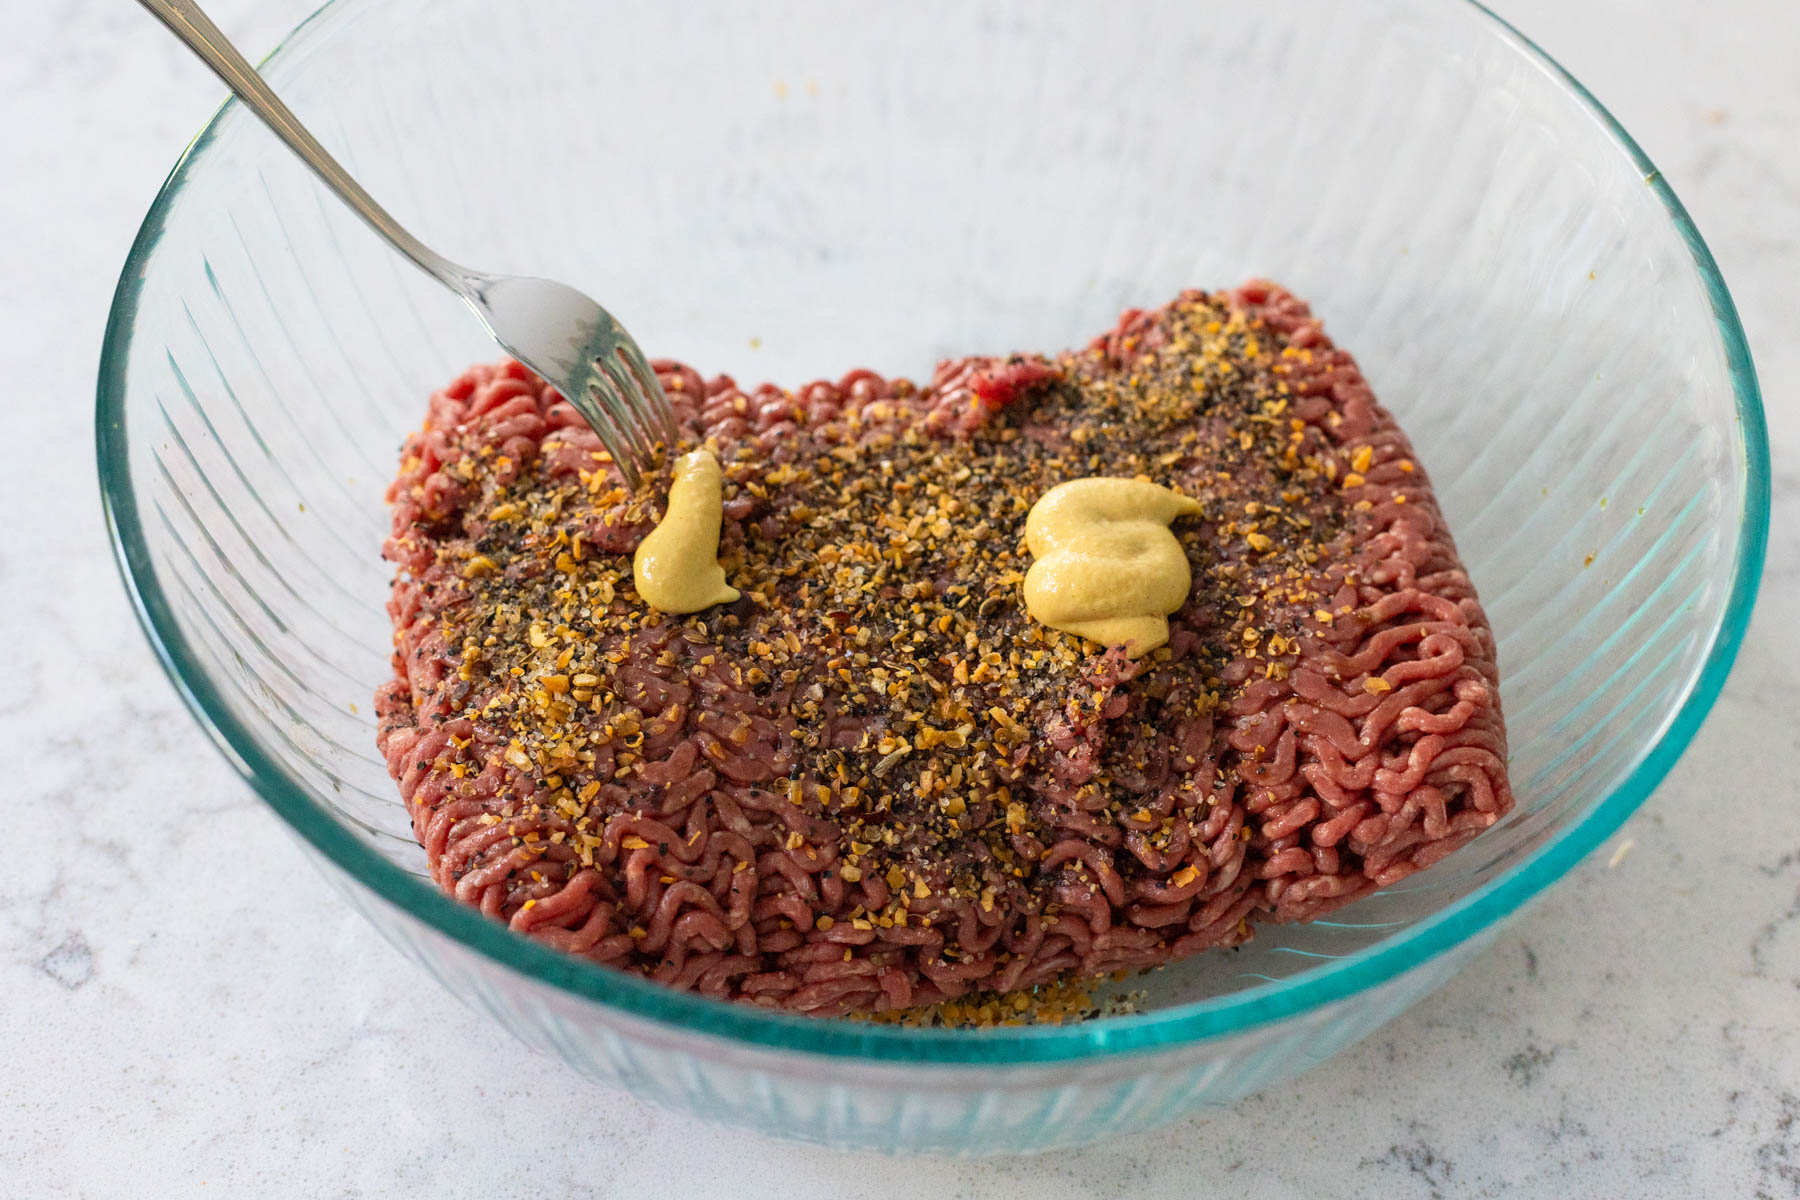 The ground beef is in a mixing bowl topped with seasonings and mustard.